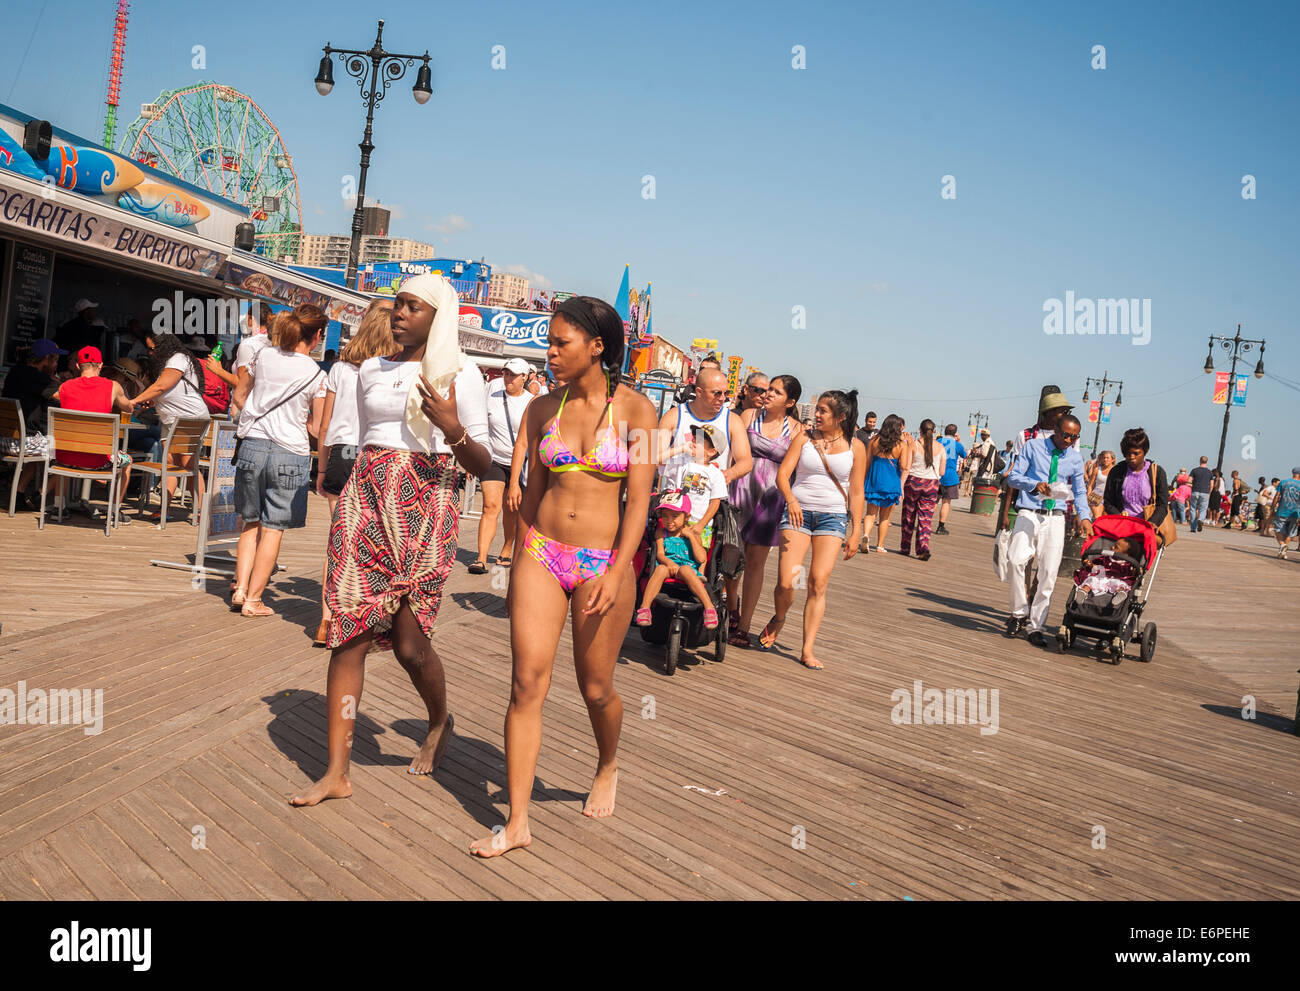 Young women, one in traditional clothing and the other in a bikini, join the crowds on the boardwalk at Coney Island in Brooklyn Stock Photo